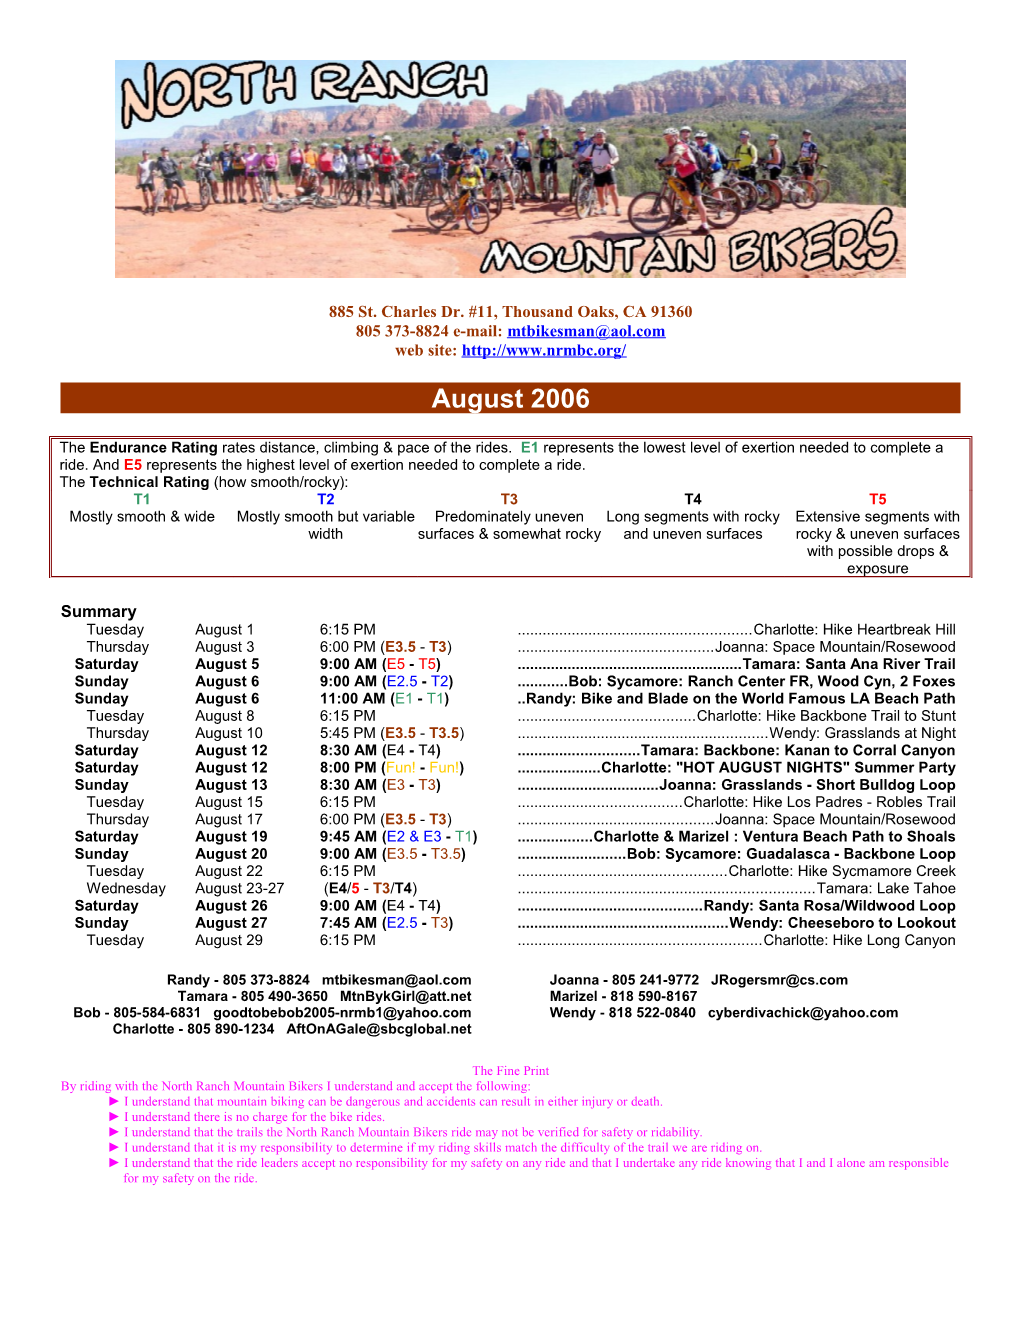 North Ranch Mountain Bikers Newsletter - August 2006